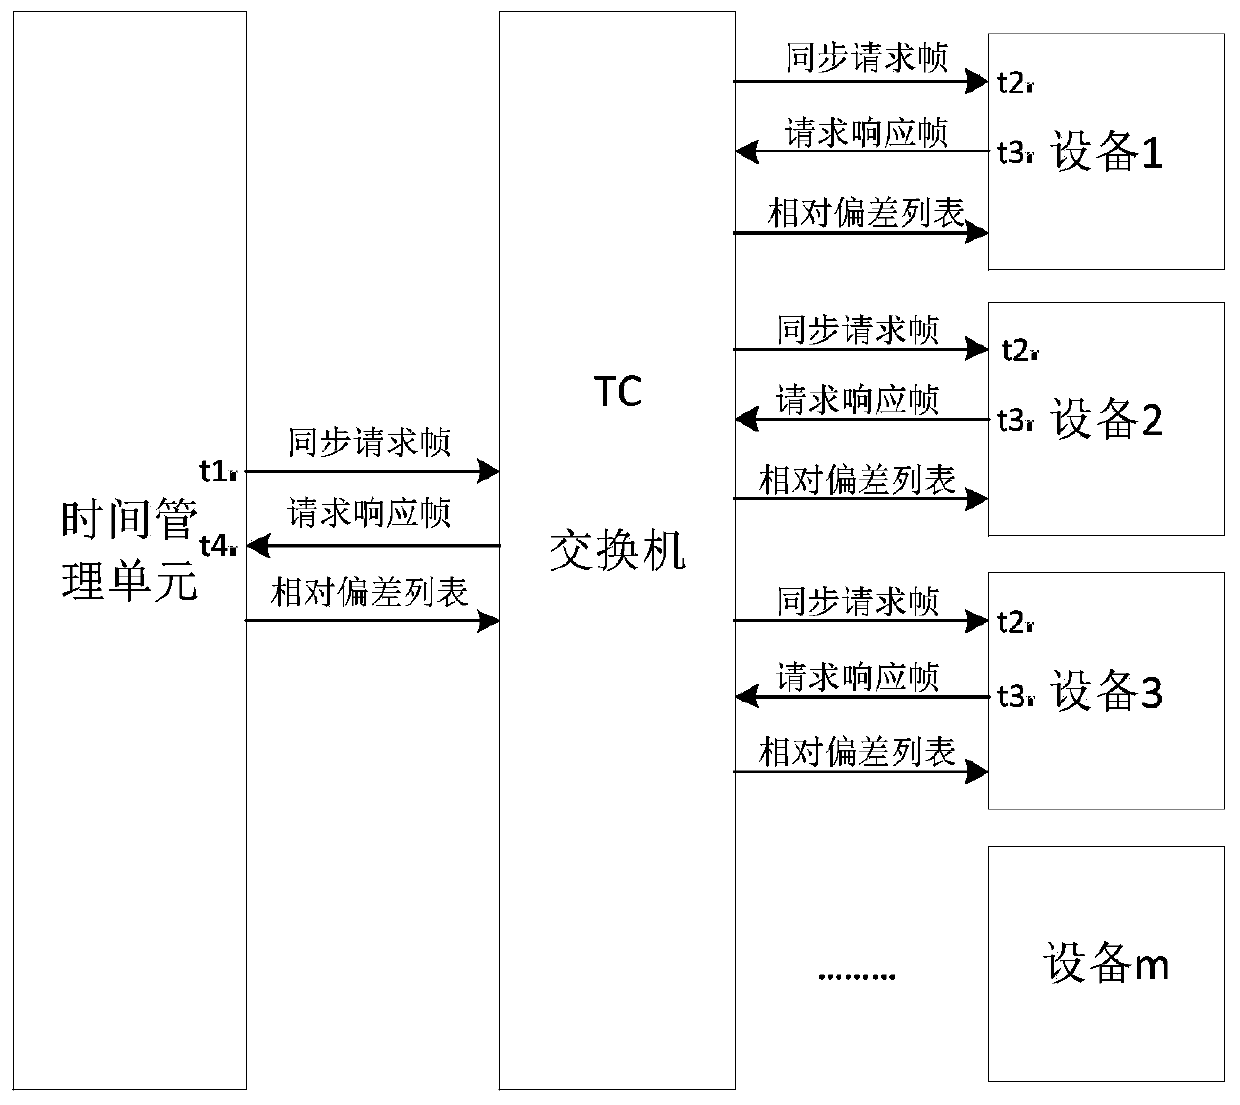 Clock synchronization method for equipment in local area network